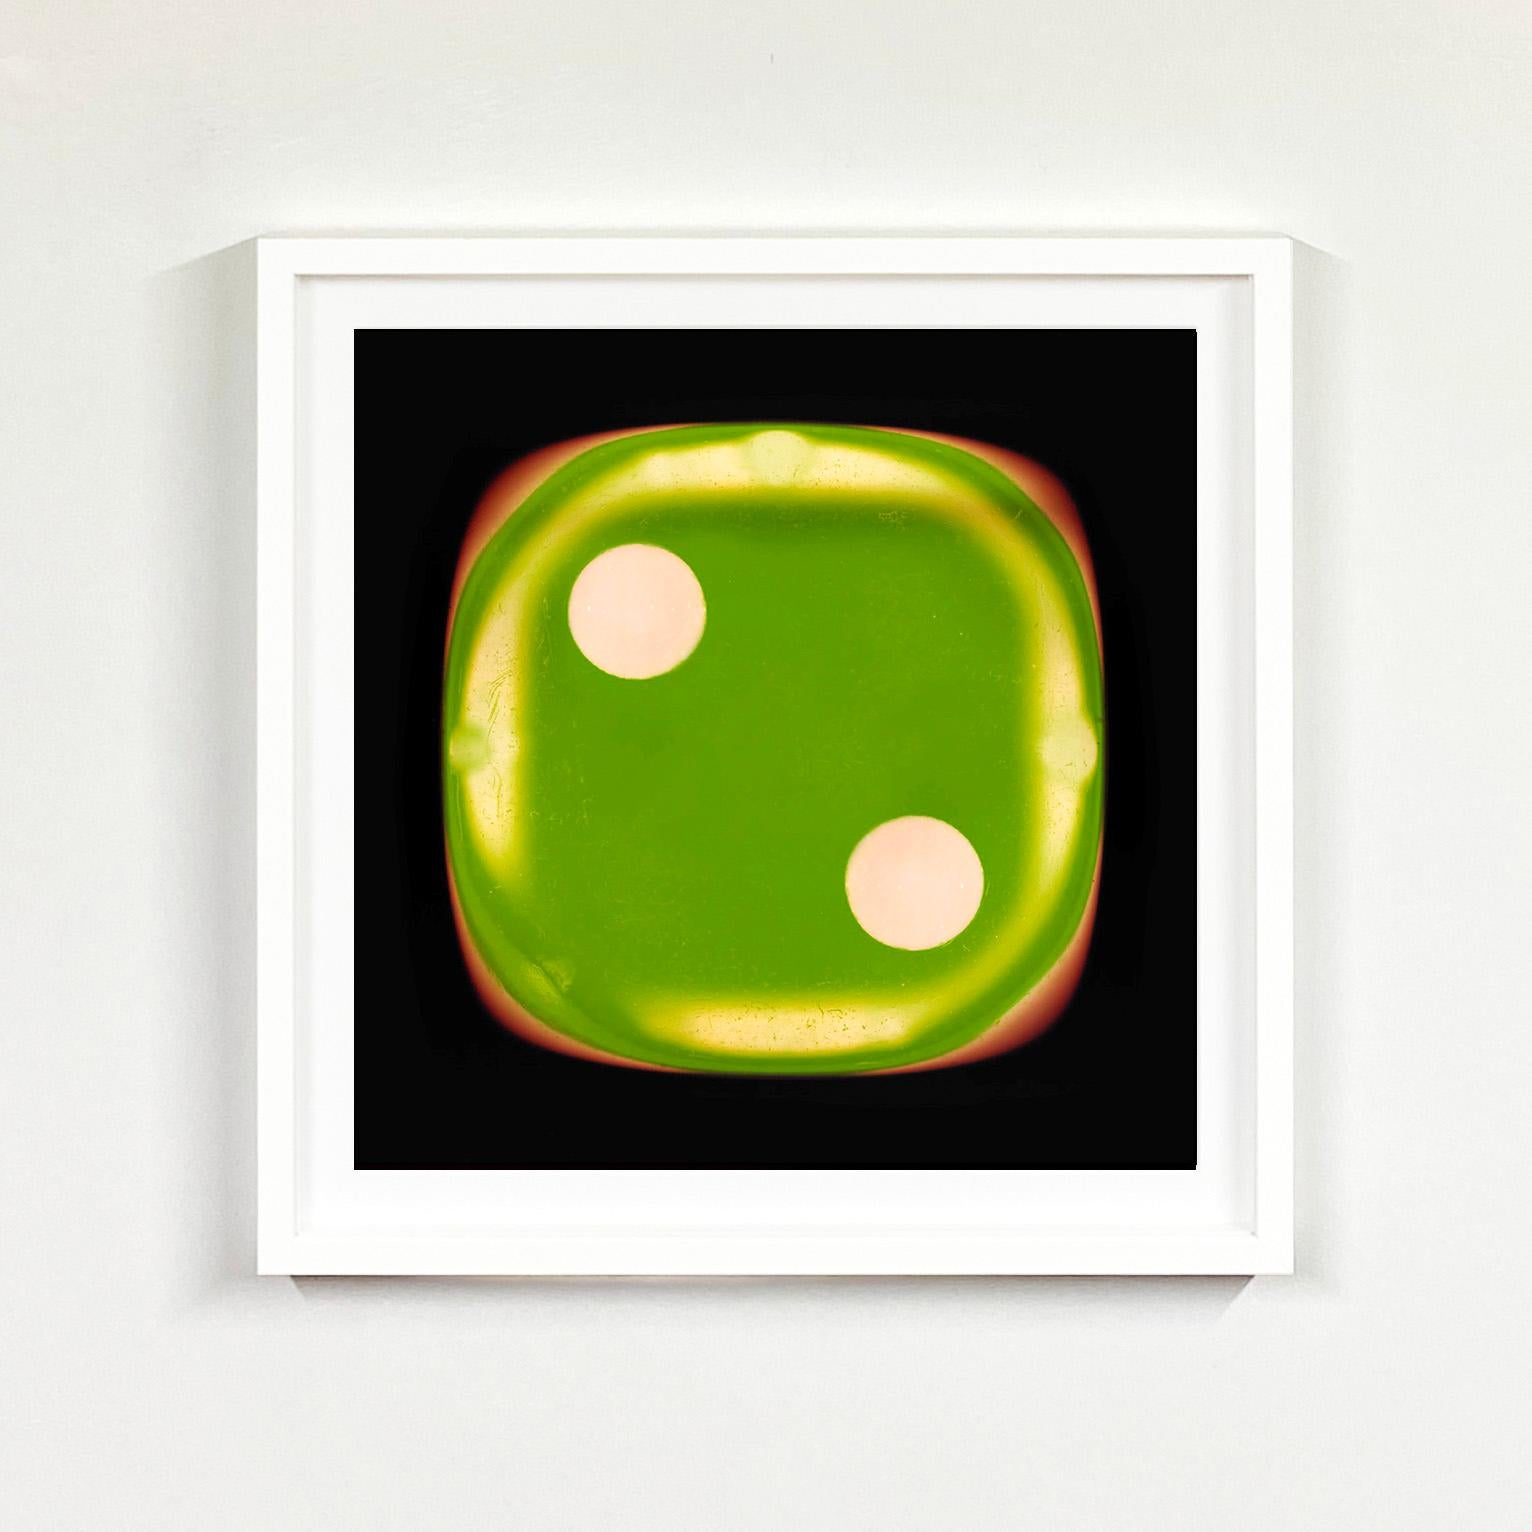 Dice Series, Green Two - Pop Art Color Photography - Print by Heidler & Heeps